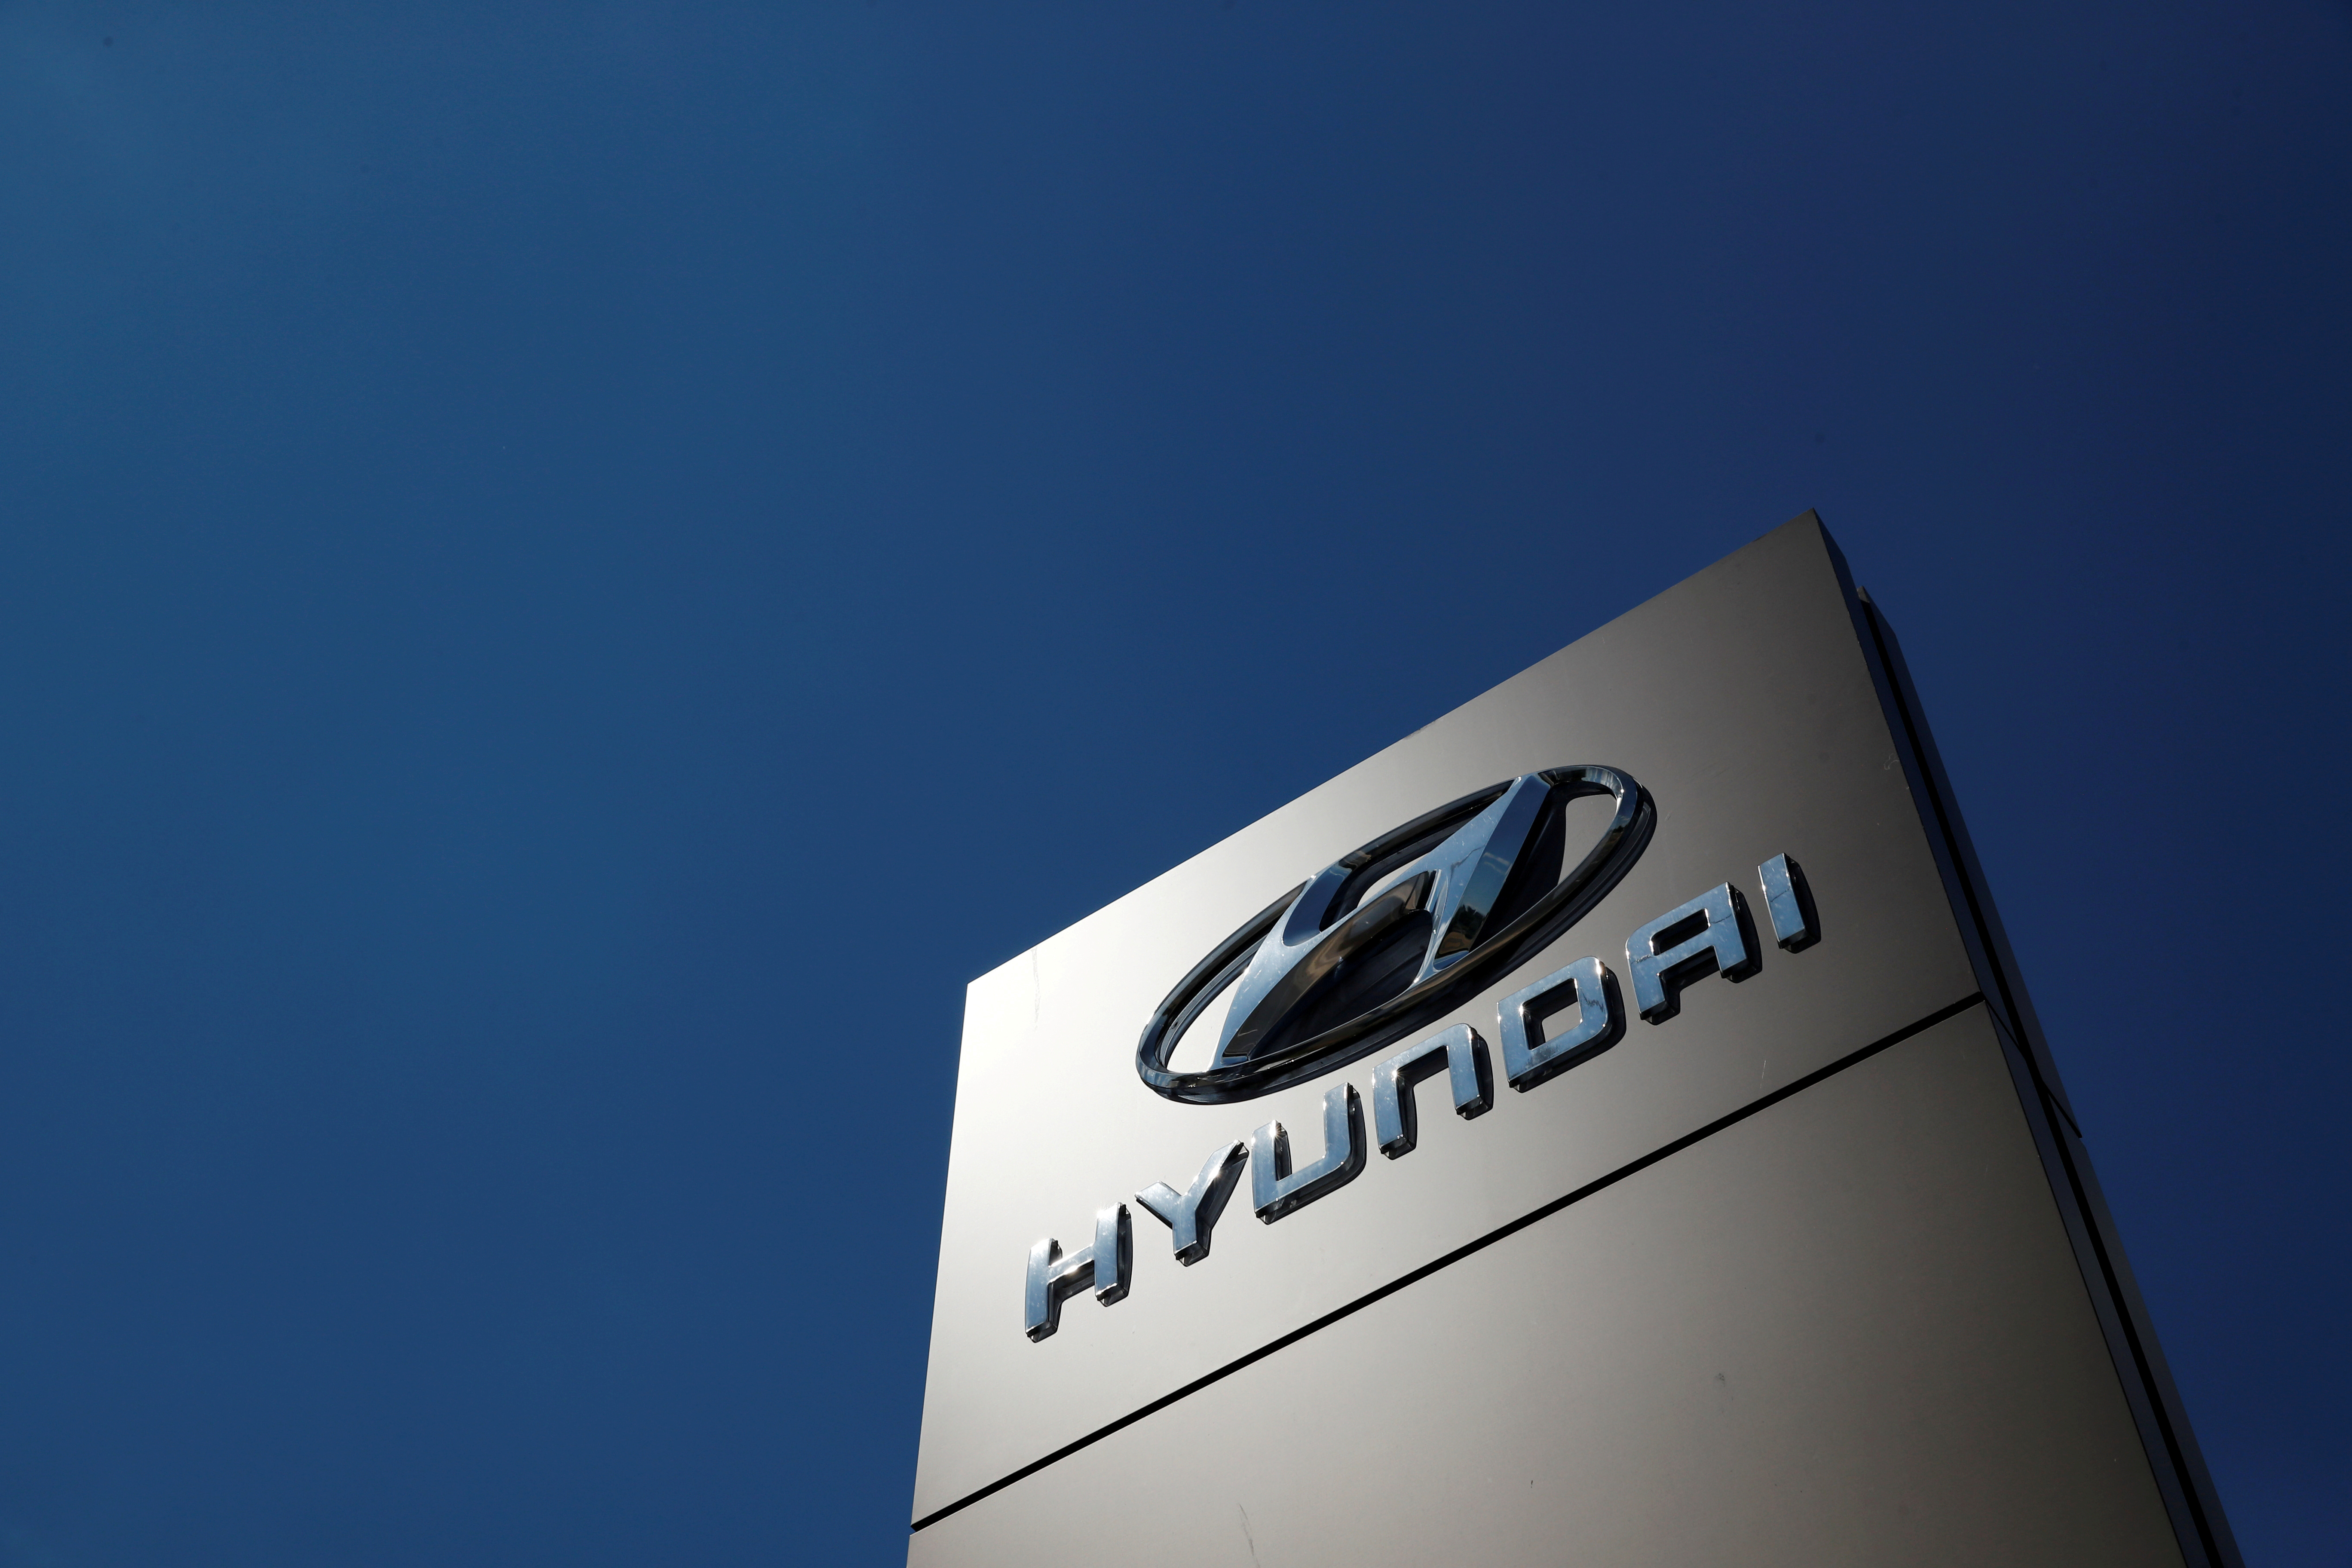 A shop sign of Hyundai is seen outside a car showroom in Bletchley, Milton Keynes, Britain